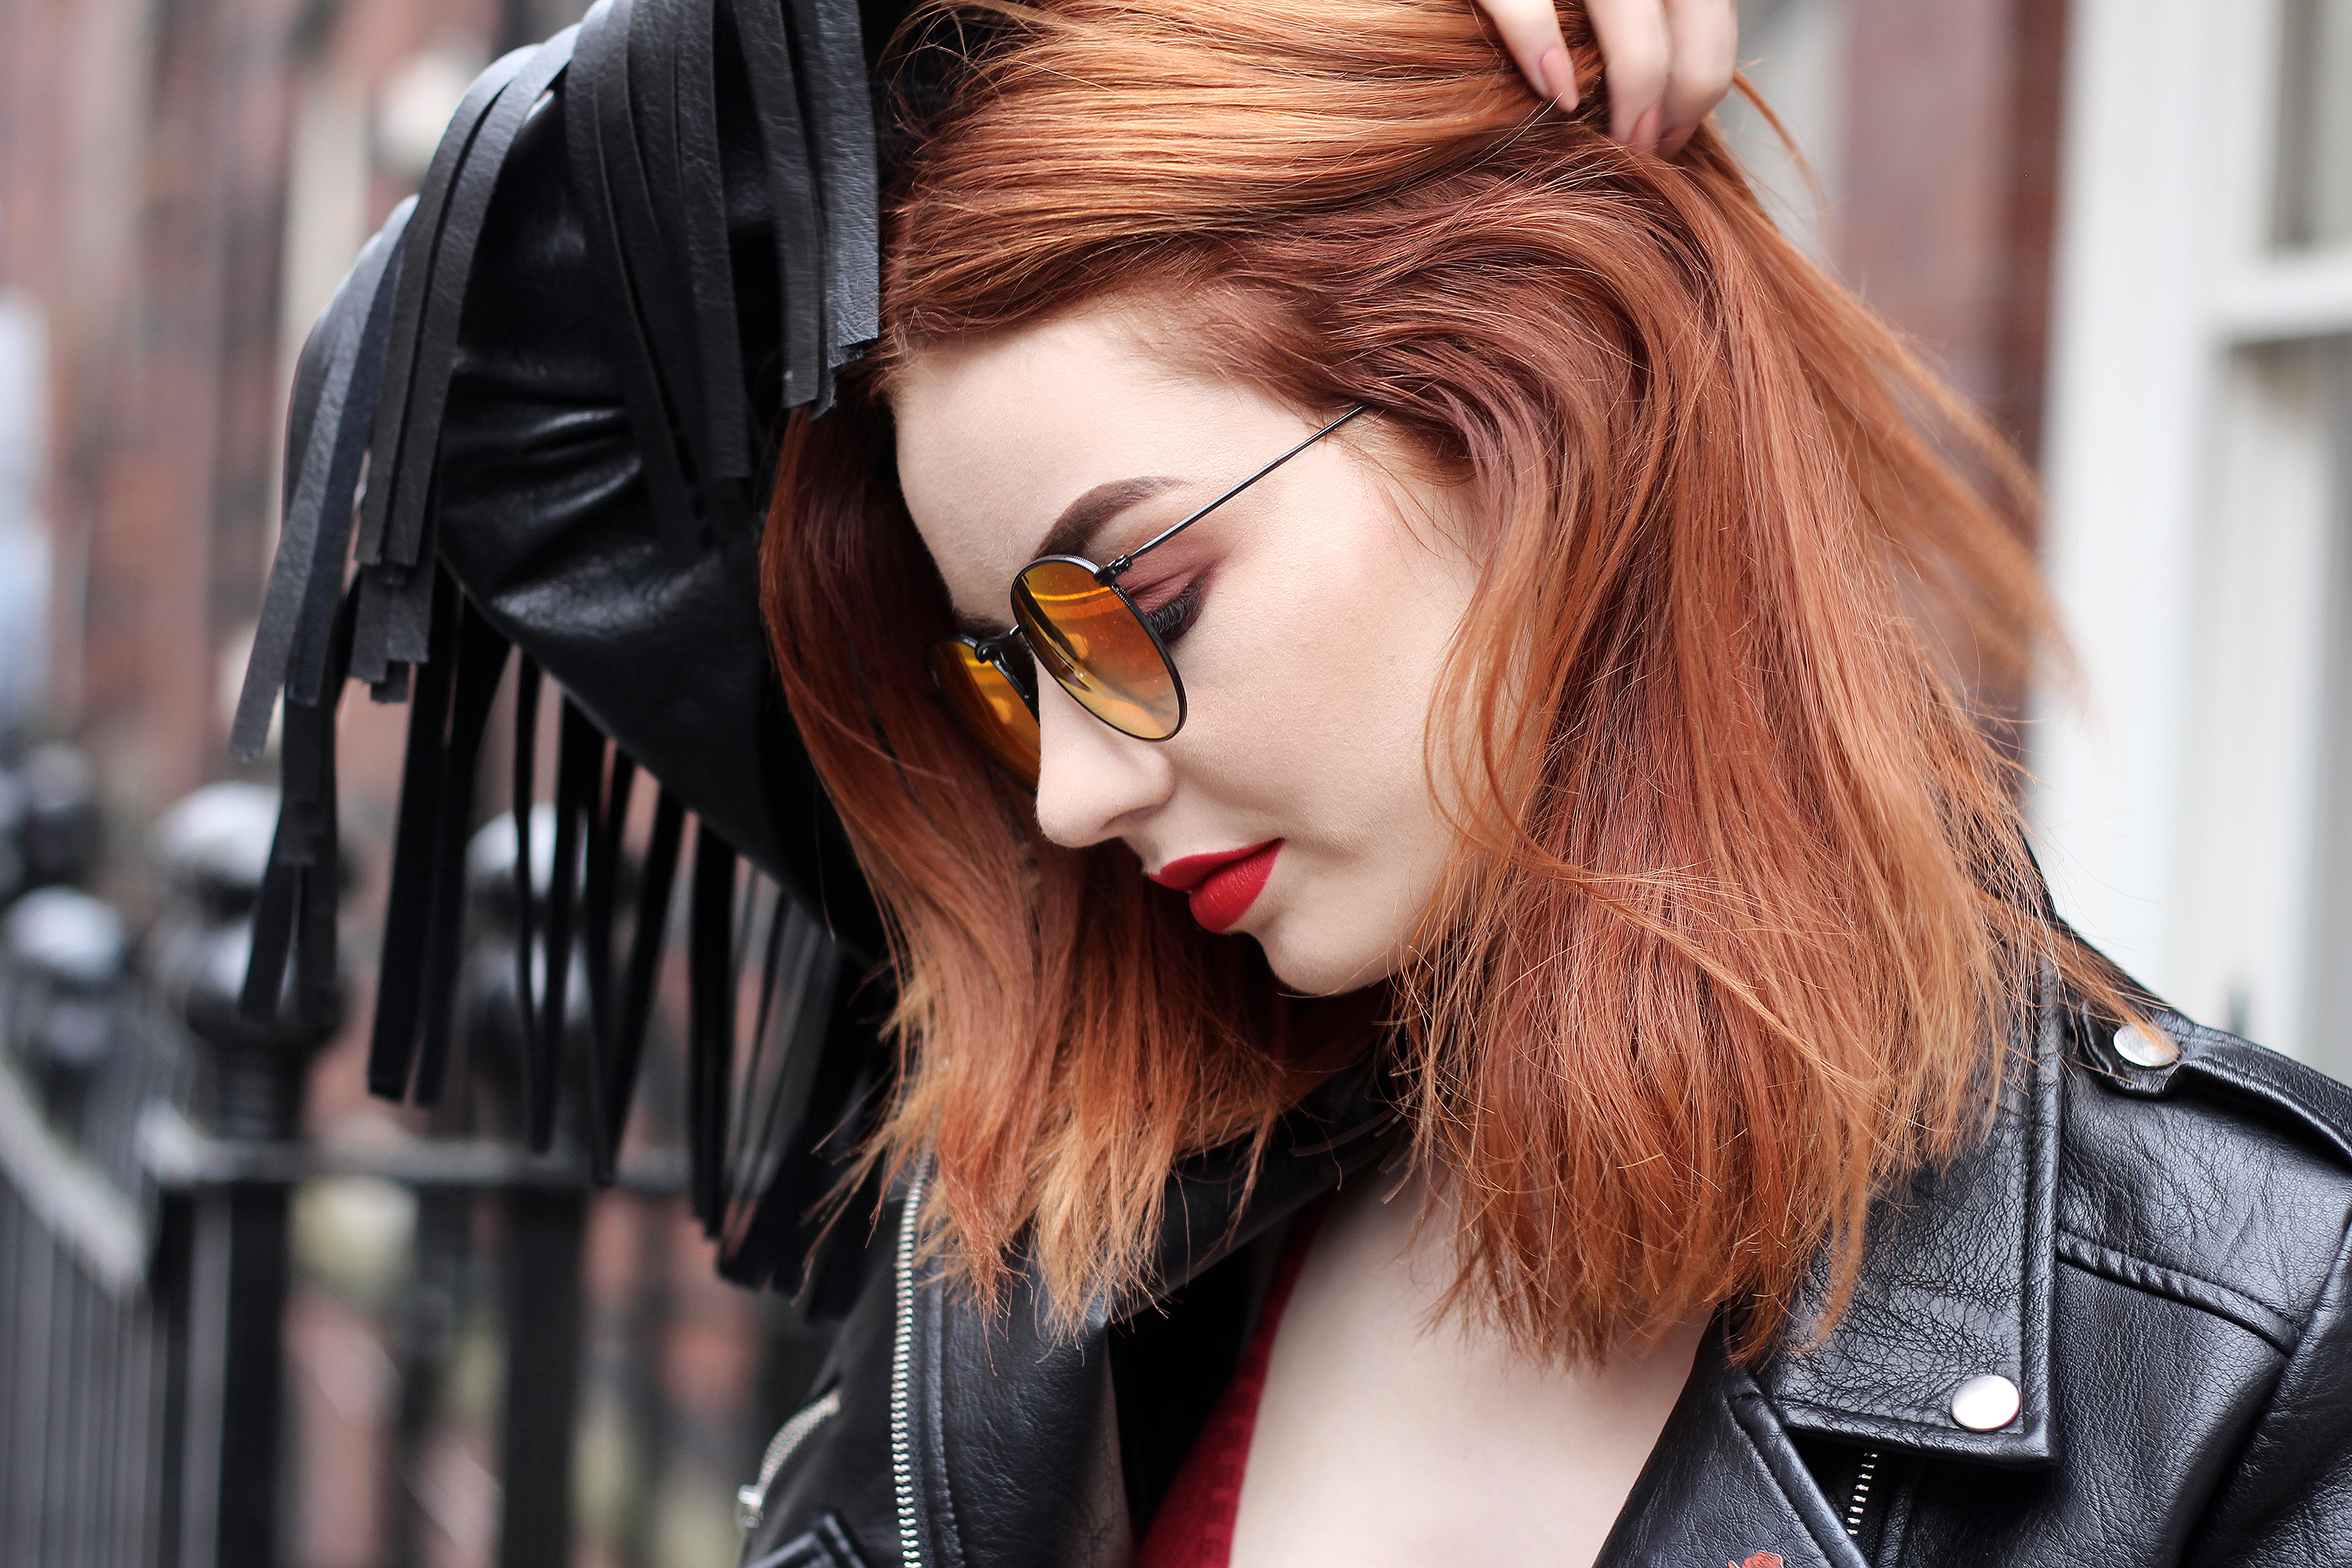 ray-ban-red-mirror-lens